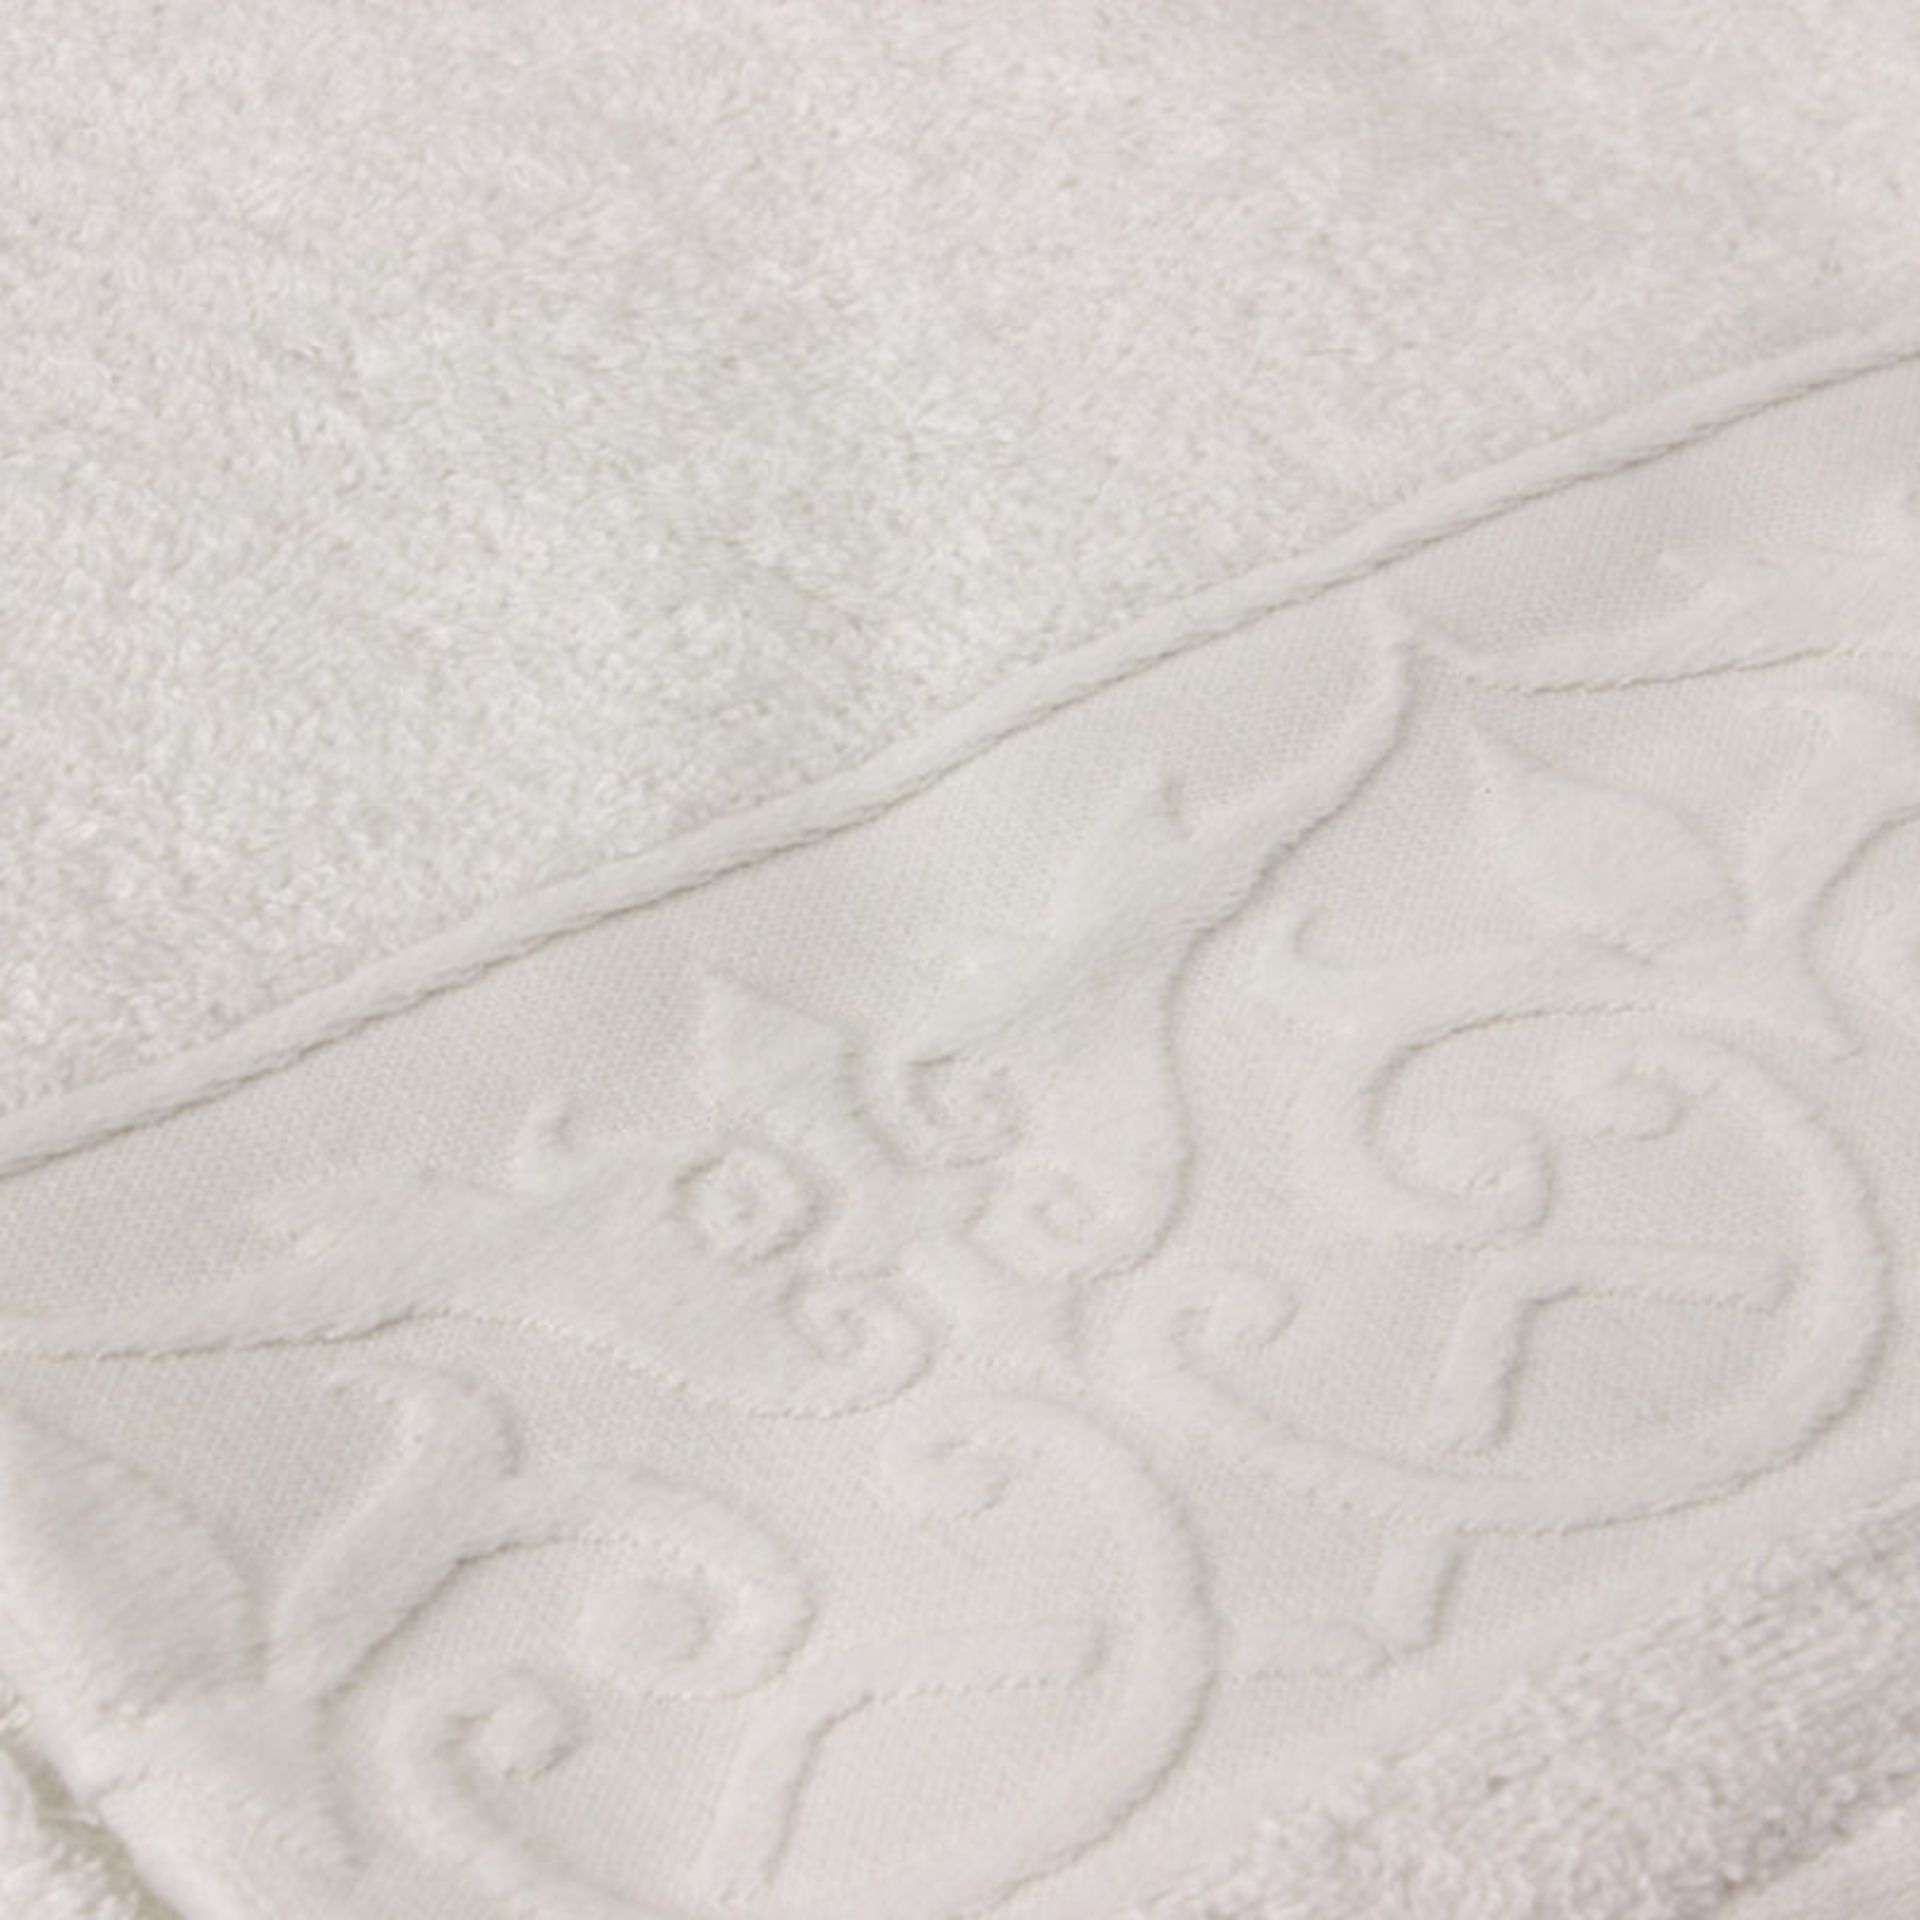 V *TRADE QTY* Brand New Frette Italian White Bath Towel With Embossed Pattern X 40 YOUR BID PRICE TO